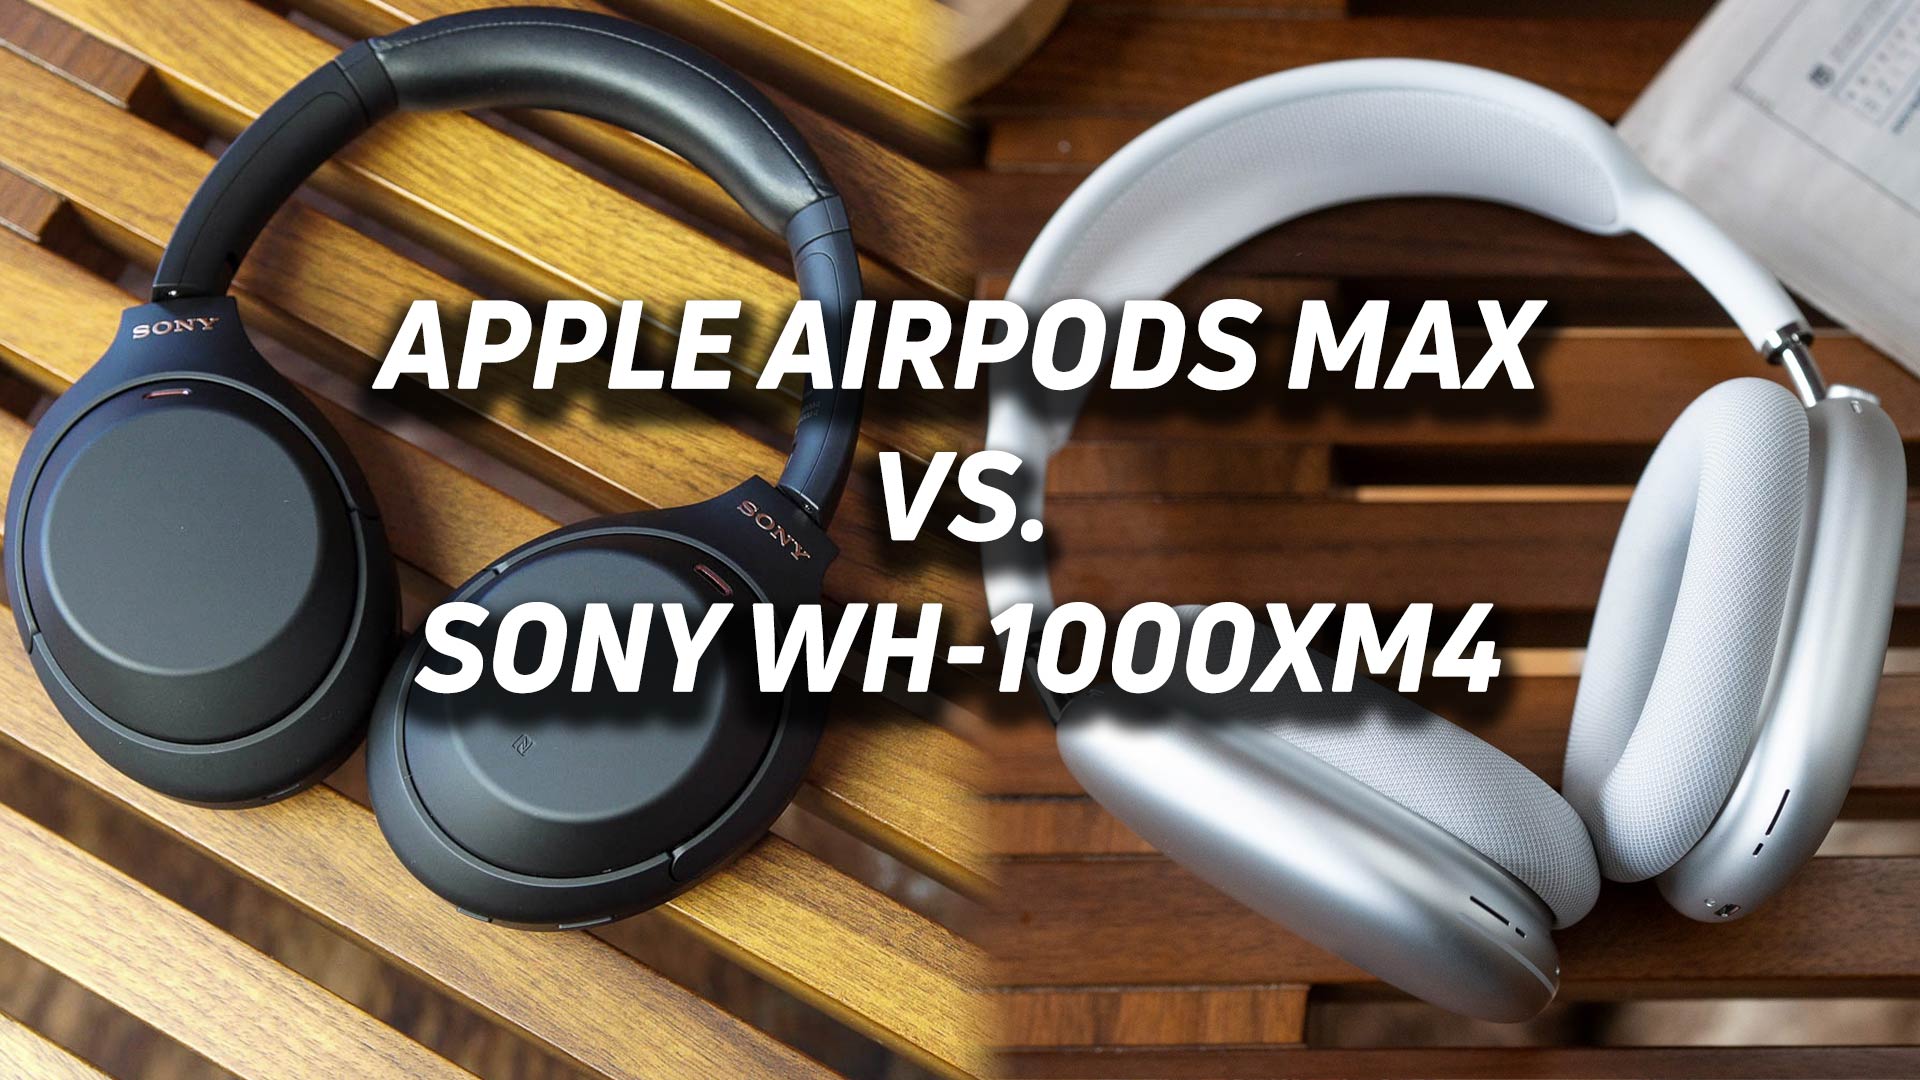 A blended image of the Sony WH-1000XM4 and Apple AirPods Max.